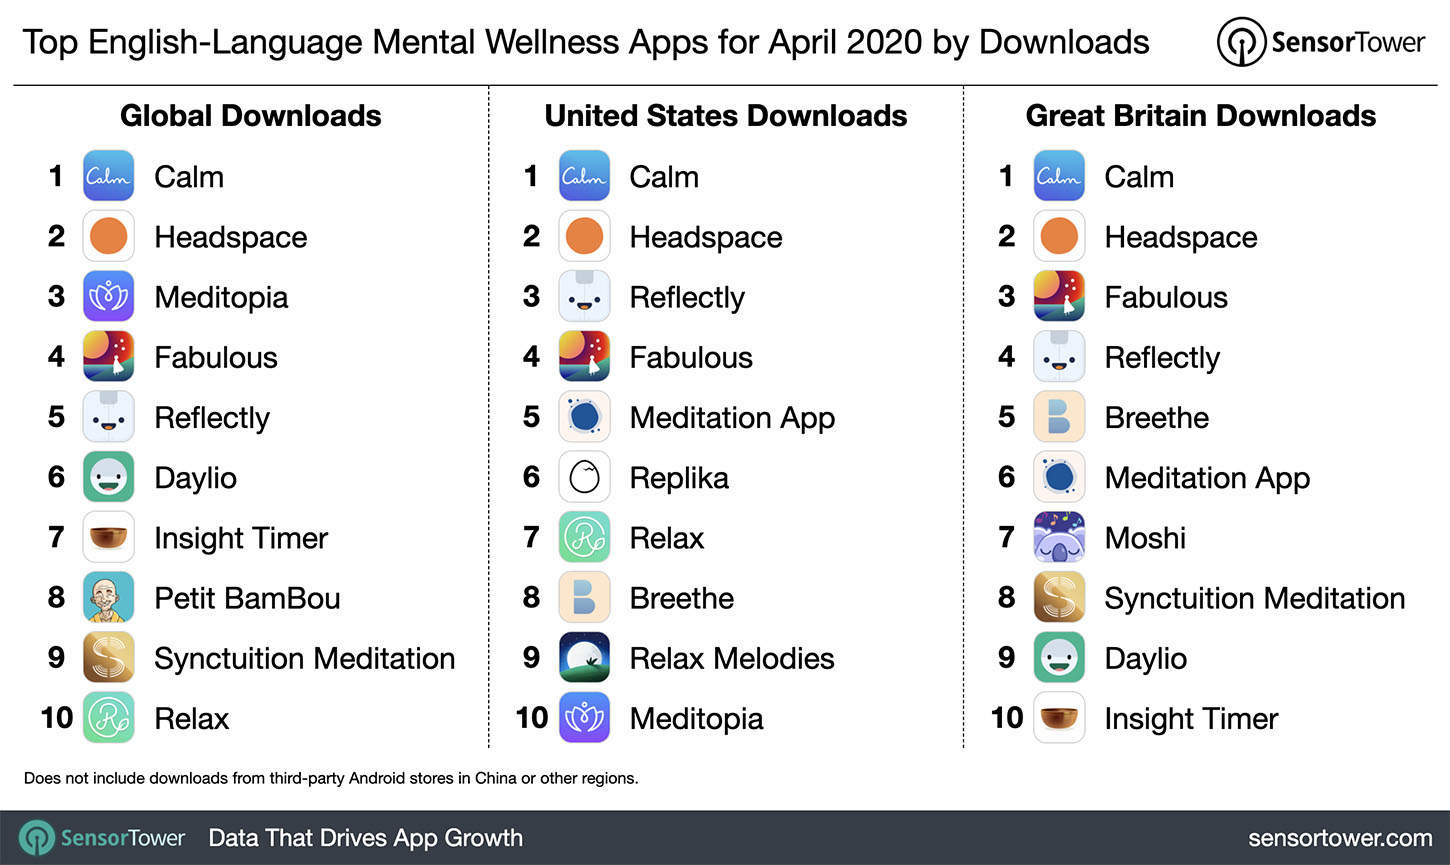 Top 10 English Language Mental Wellness Apps Worldwide by Downloads for April 2020